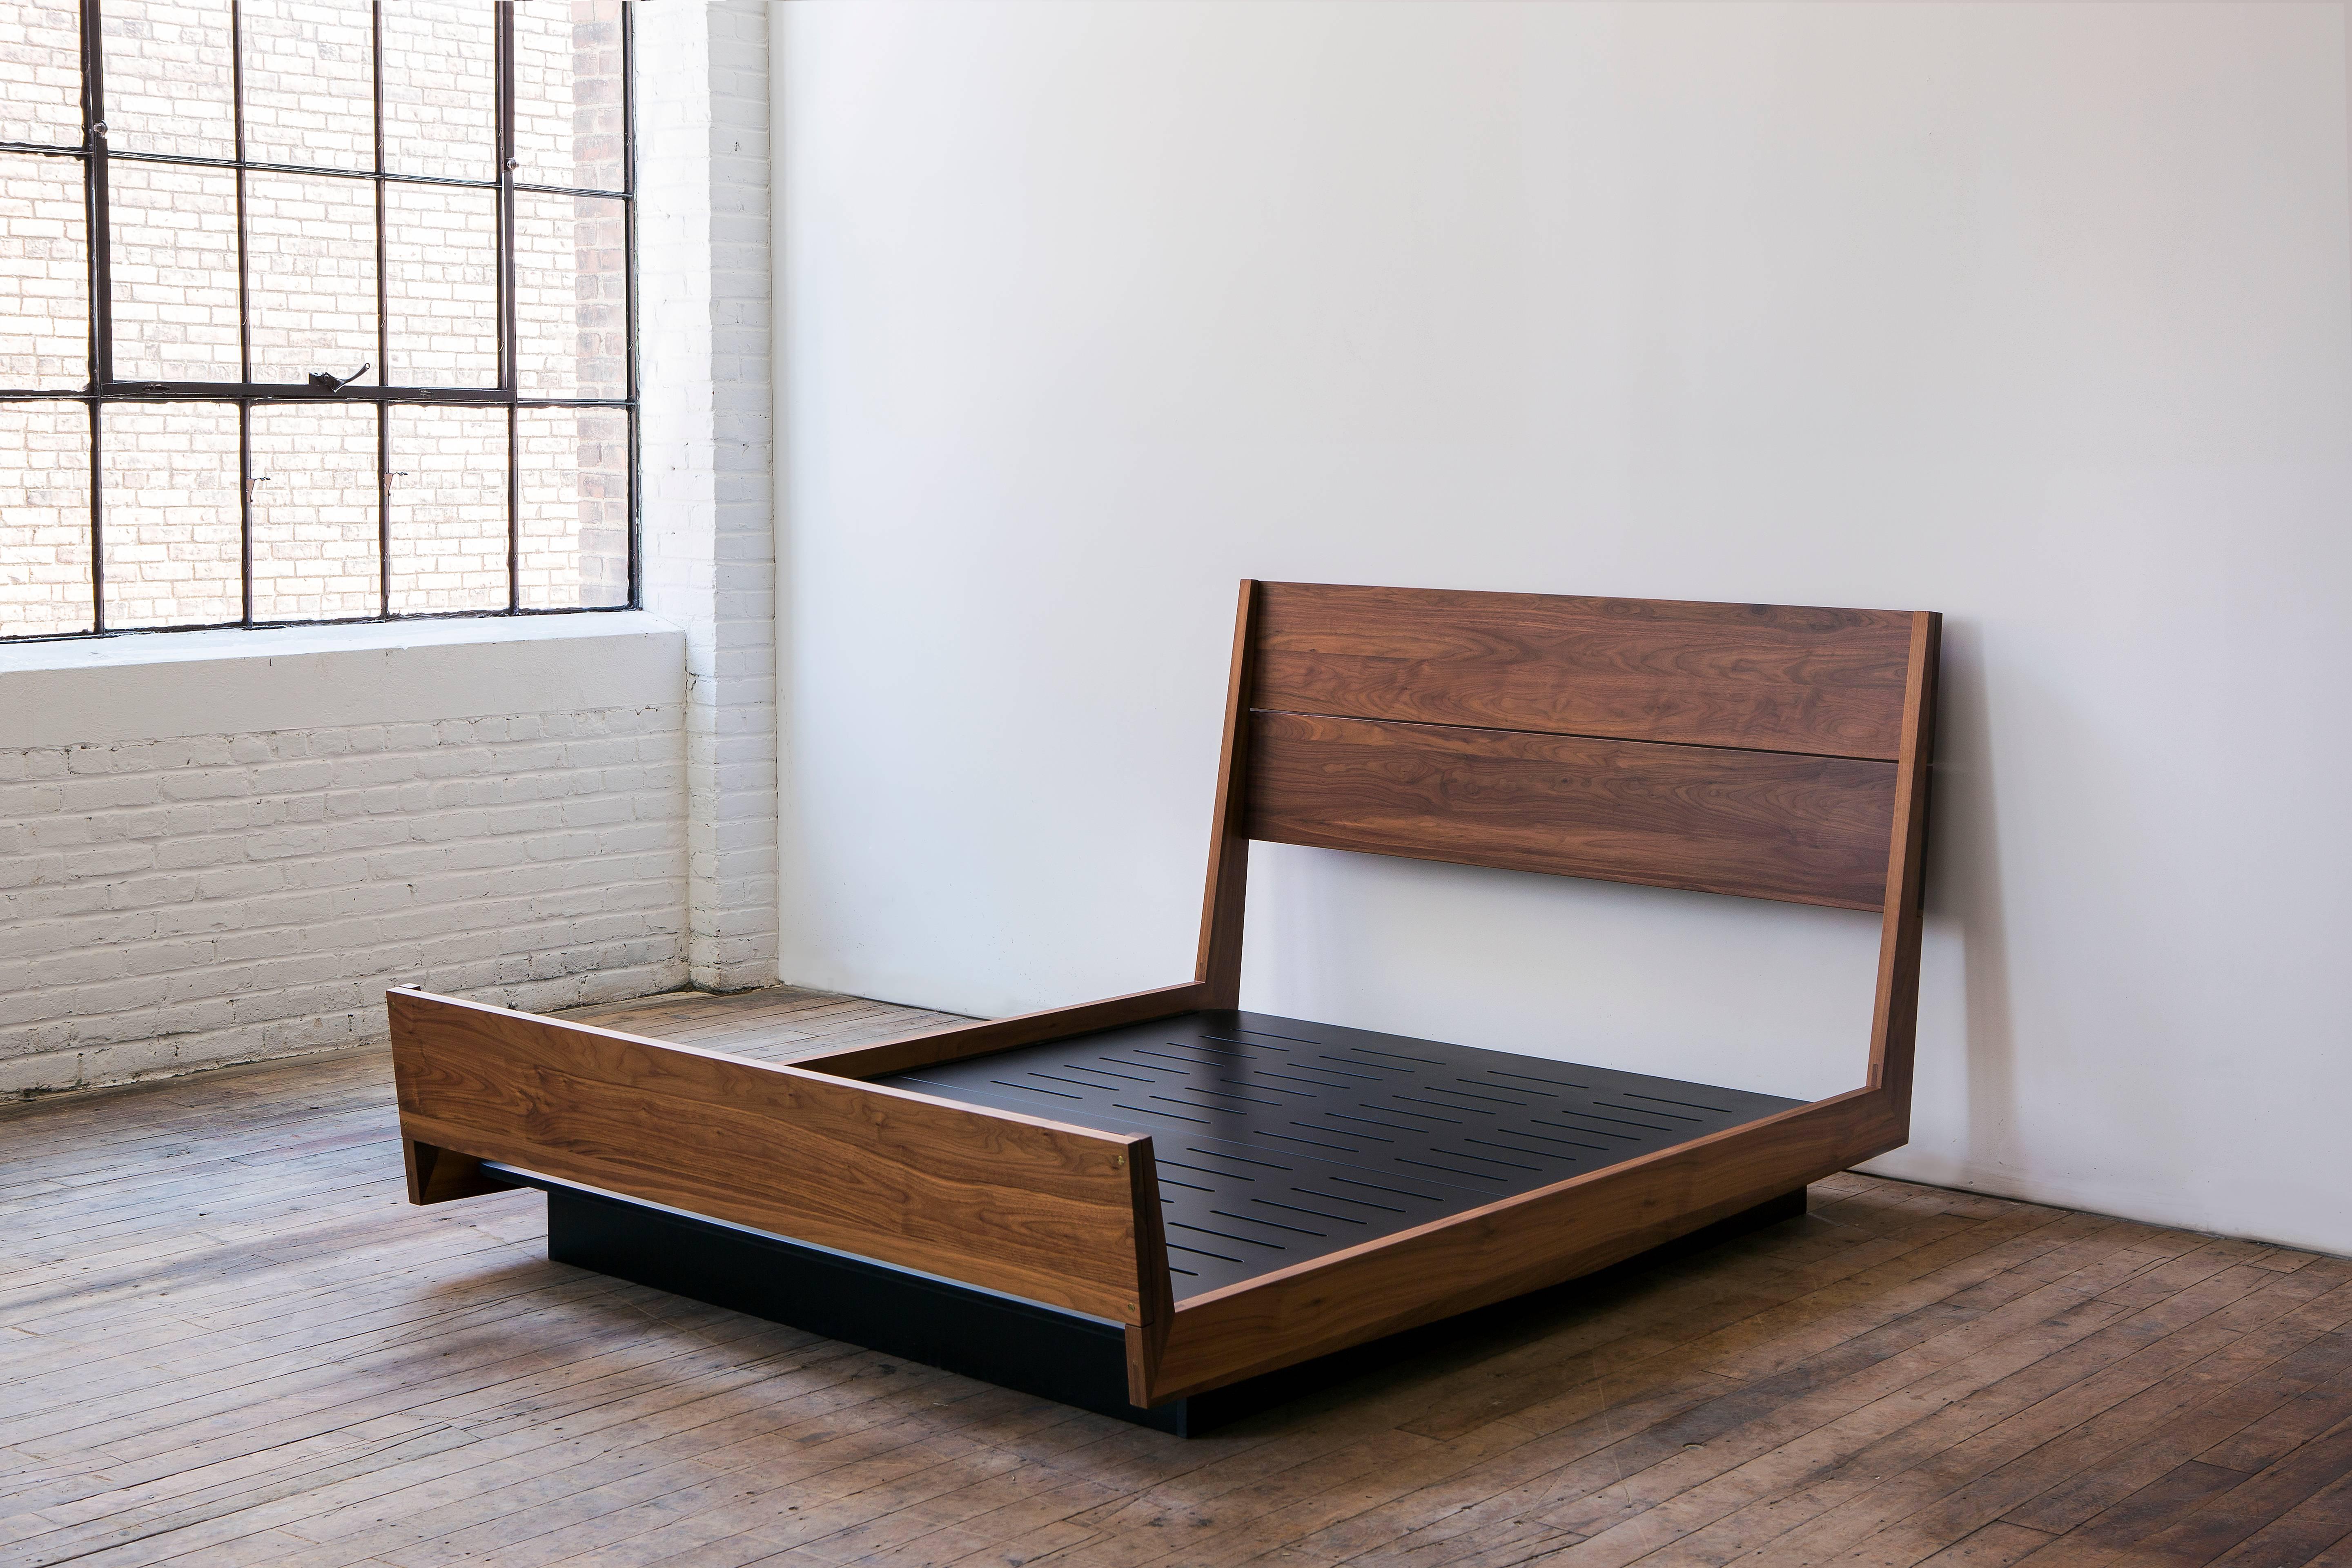 A contemporary, handmade, floating platform bed with headboard and footboard. Solid hardwood bed frame and black opaque lacquered mdf platform base. 

Shown in solid walnut with black opaque lacquered mdf base. 

Dimensions: 63.5” W x 40” H x 88.5”